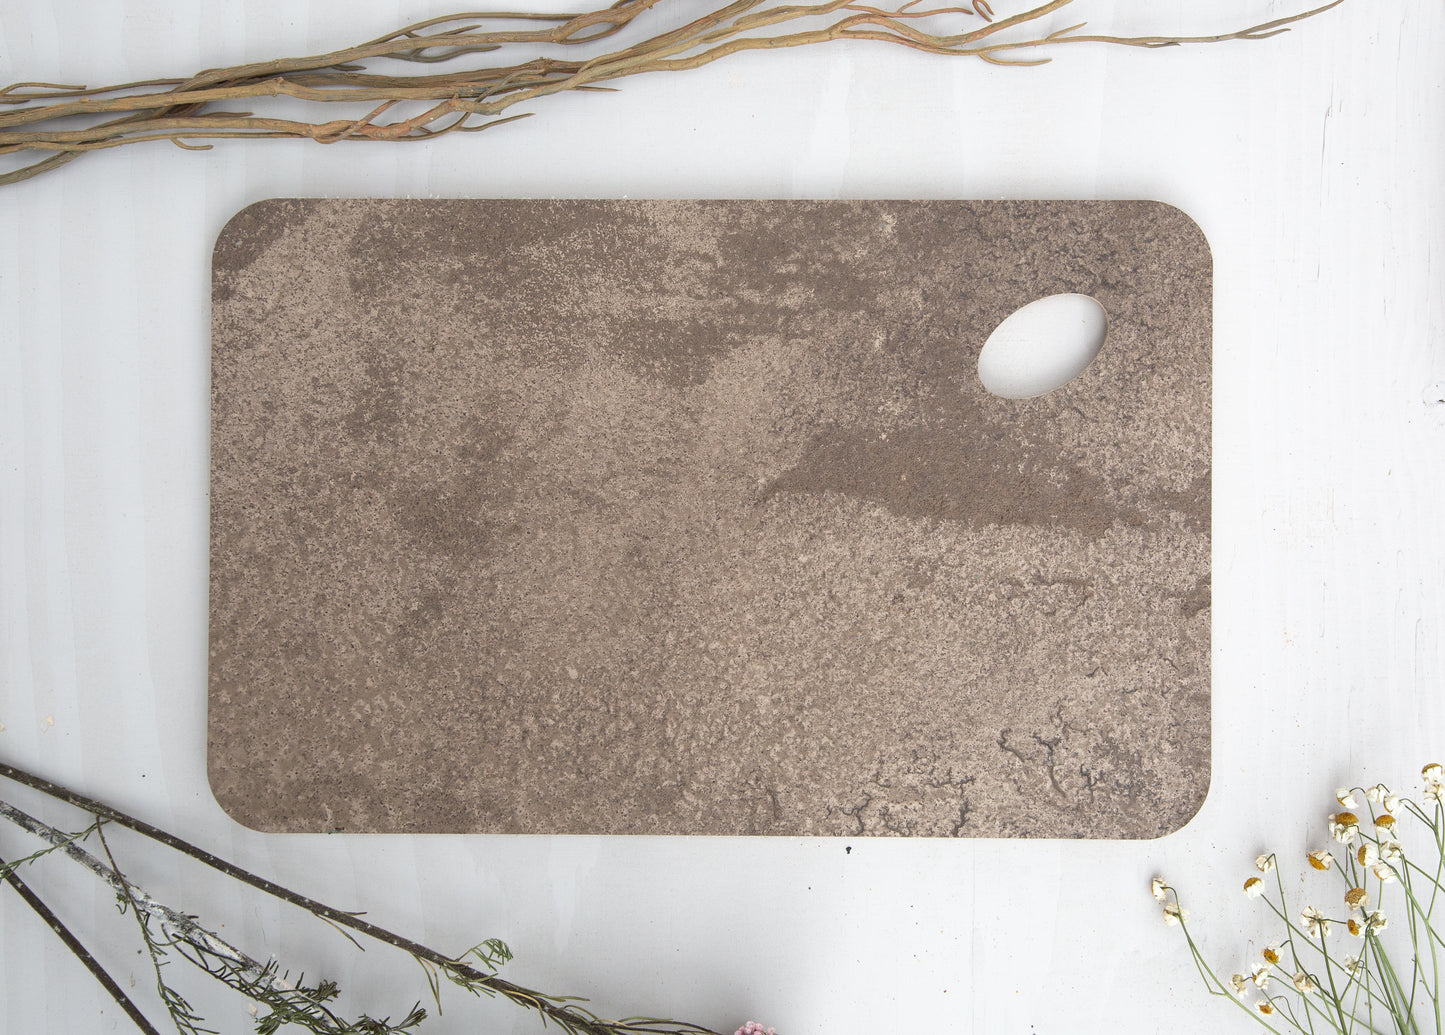 A close up of a KAVA tray, made by pressing coffee waste and bronze into birch plywood. The corners are rounded at a soft radius and one corner is an oval shaped hole so you can hold the tray with your thumb, or hang it on a hook.